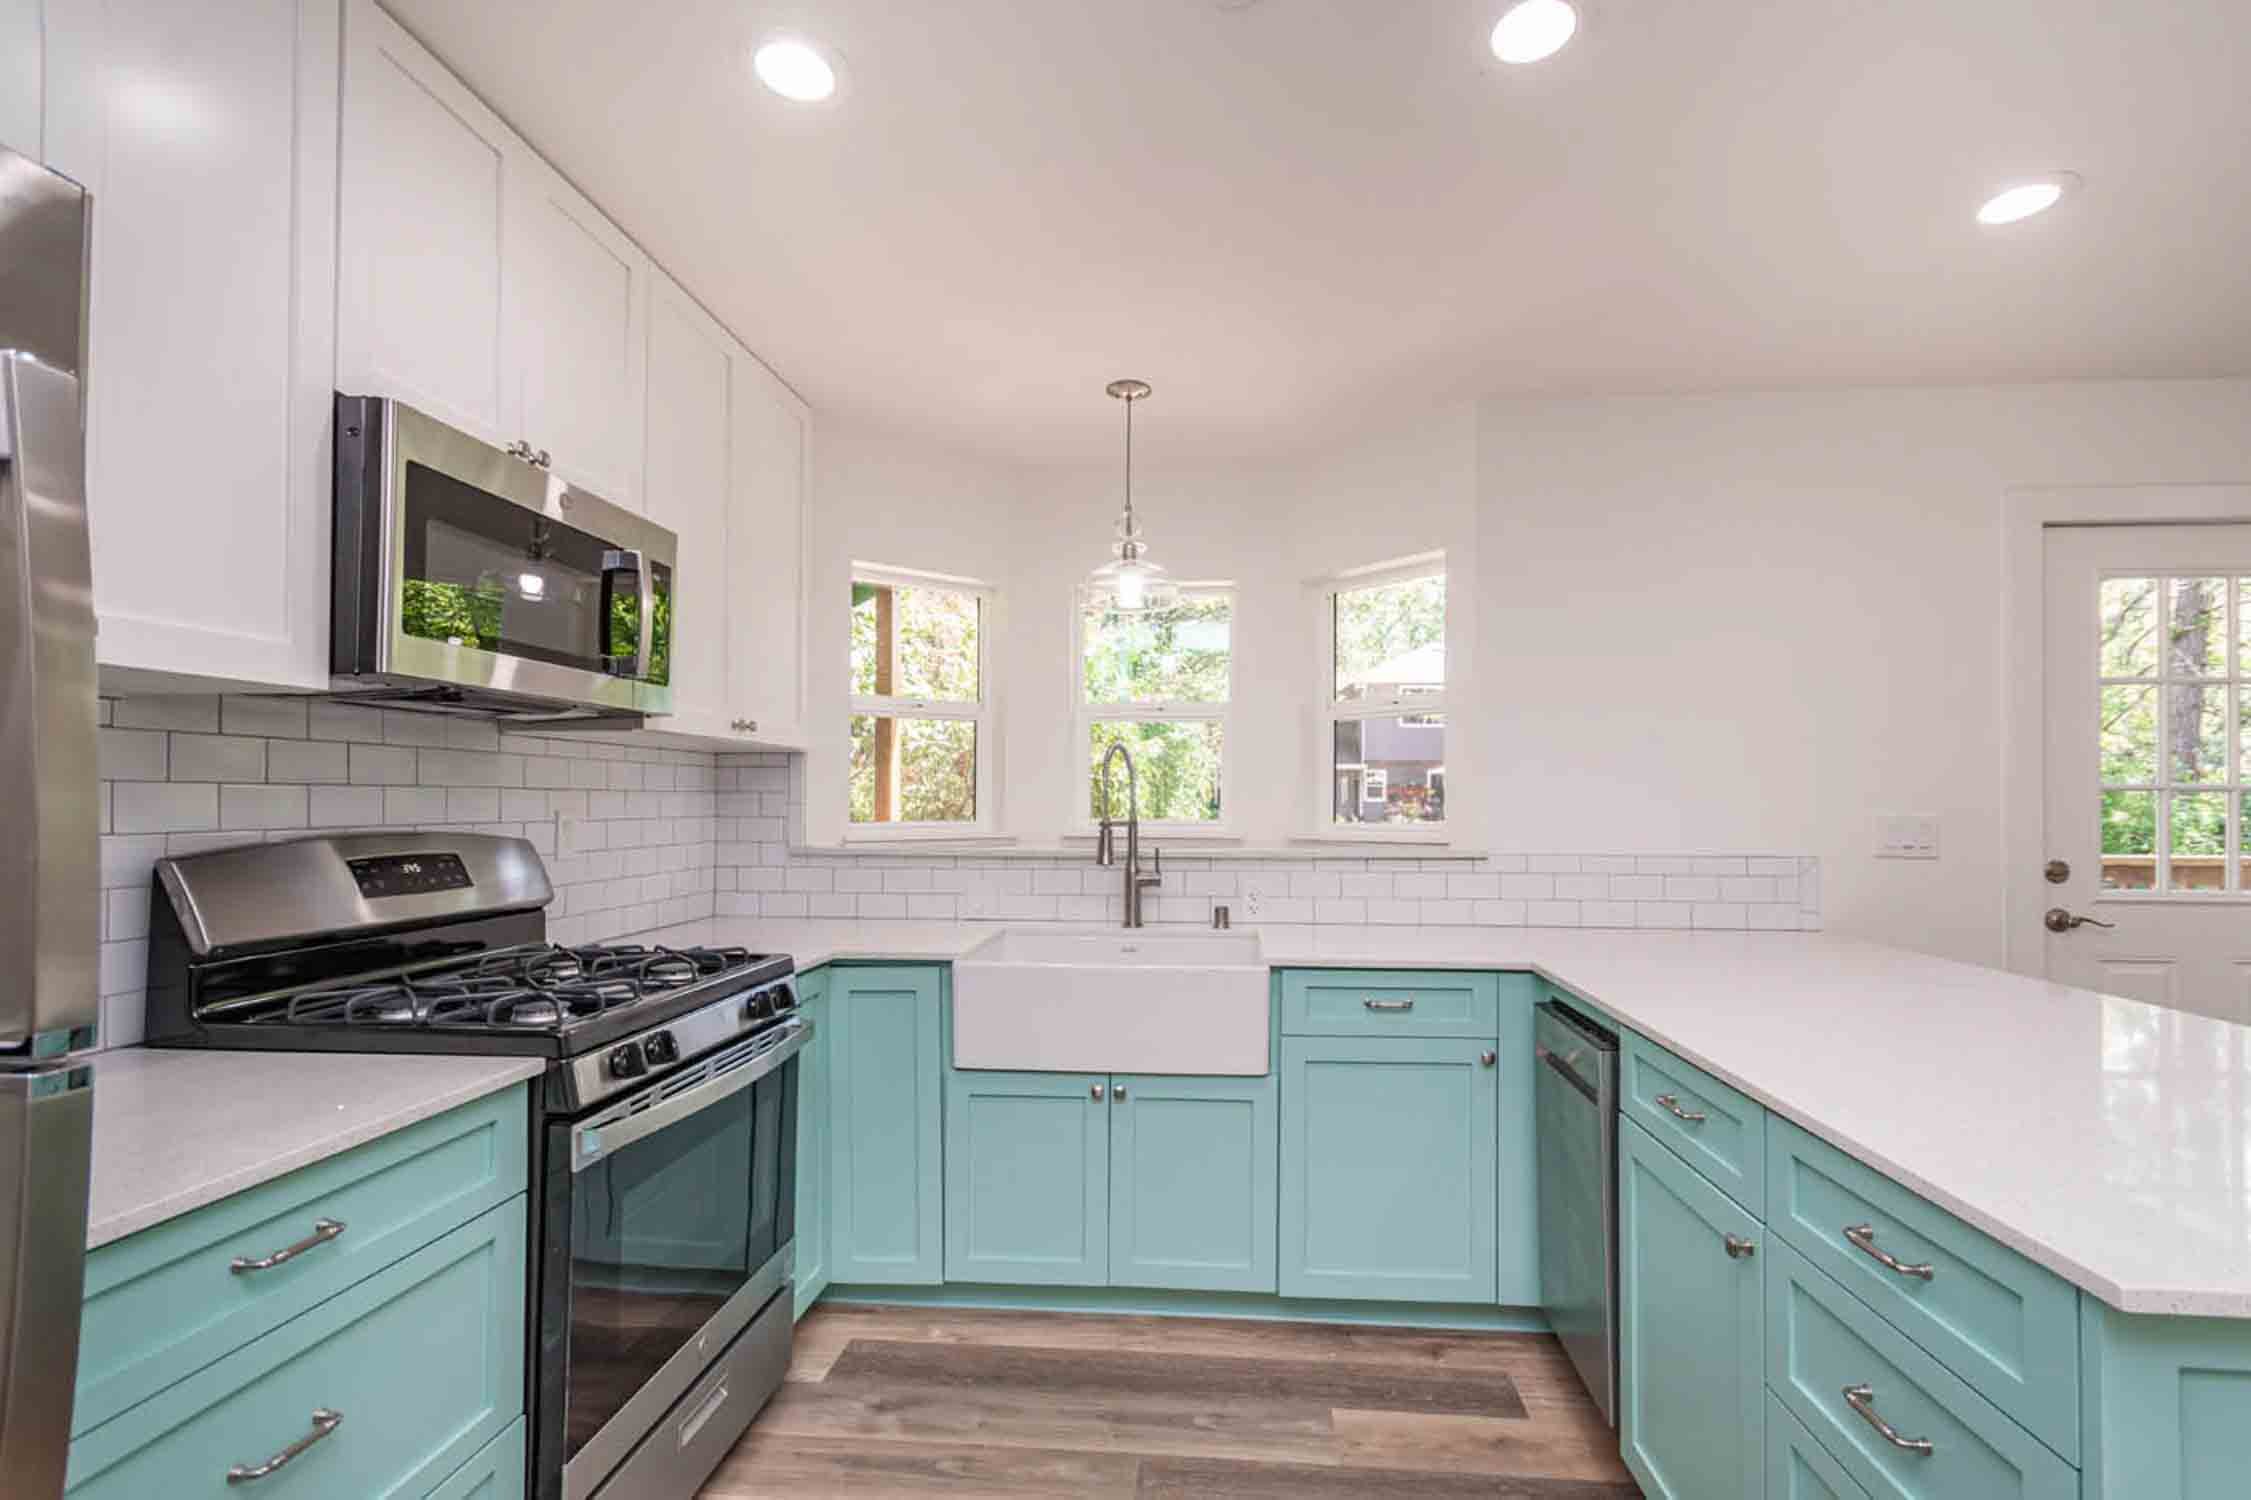 Sacramento tiny house companies and their project of a mint green kitchen in a home.